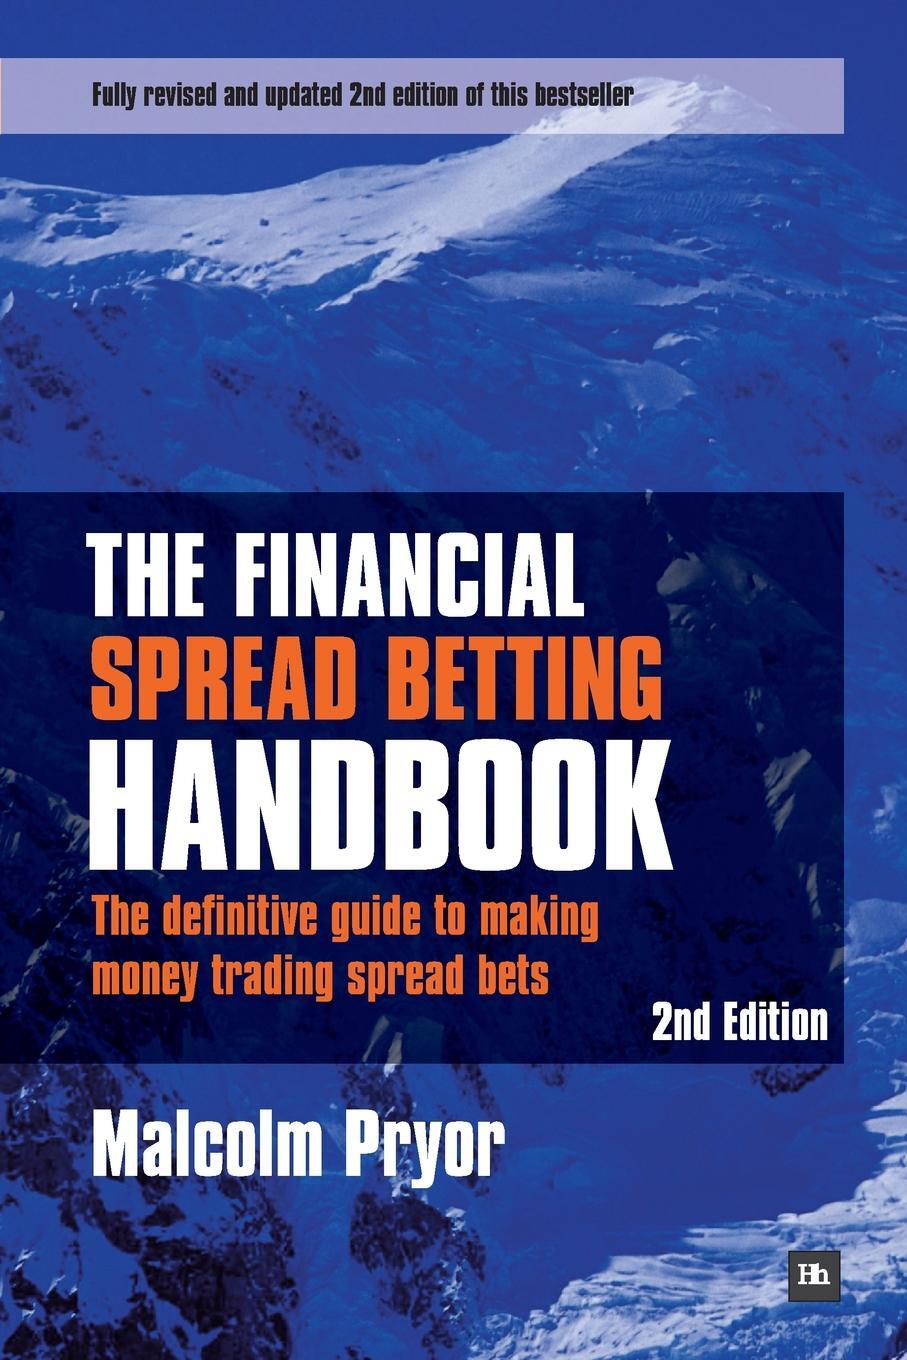 Malcolm pryors spread betting techniques dvd covers strategia forex vincente fernandez